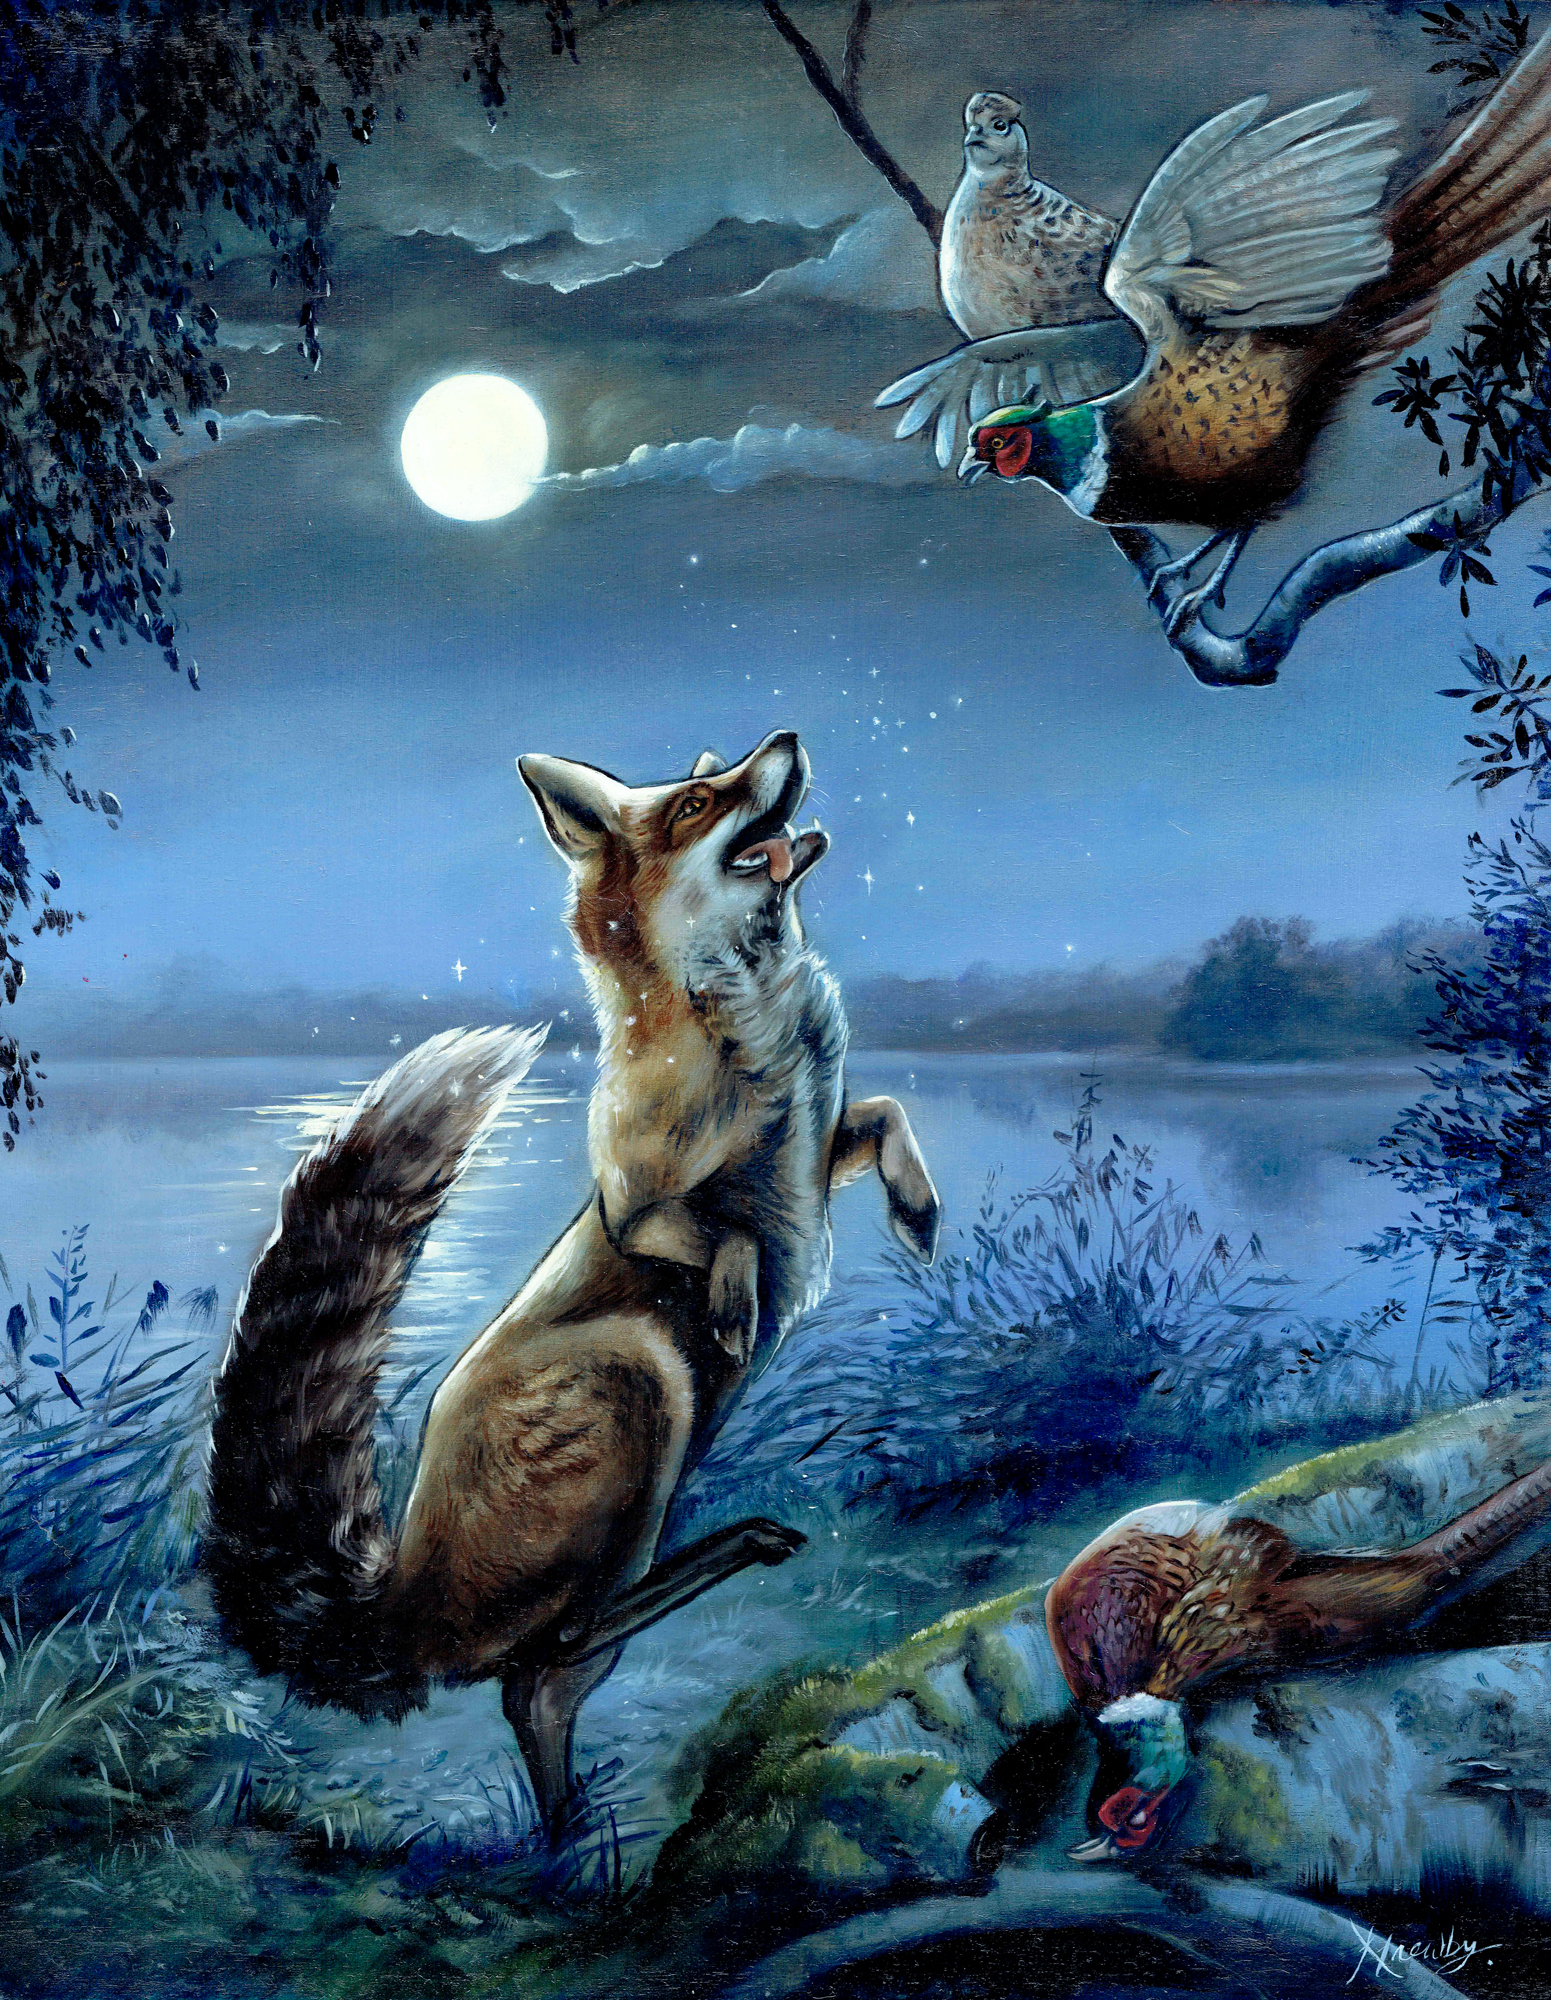 Original Oil Painting of Aesop's Fables The Fox and The Pheasants by wildlife artist Krysten Newby